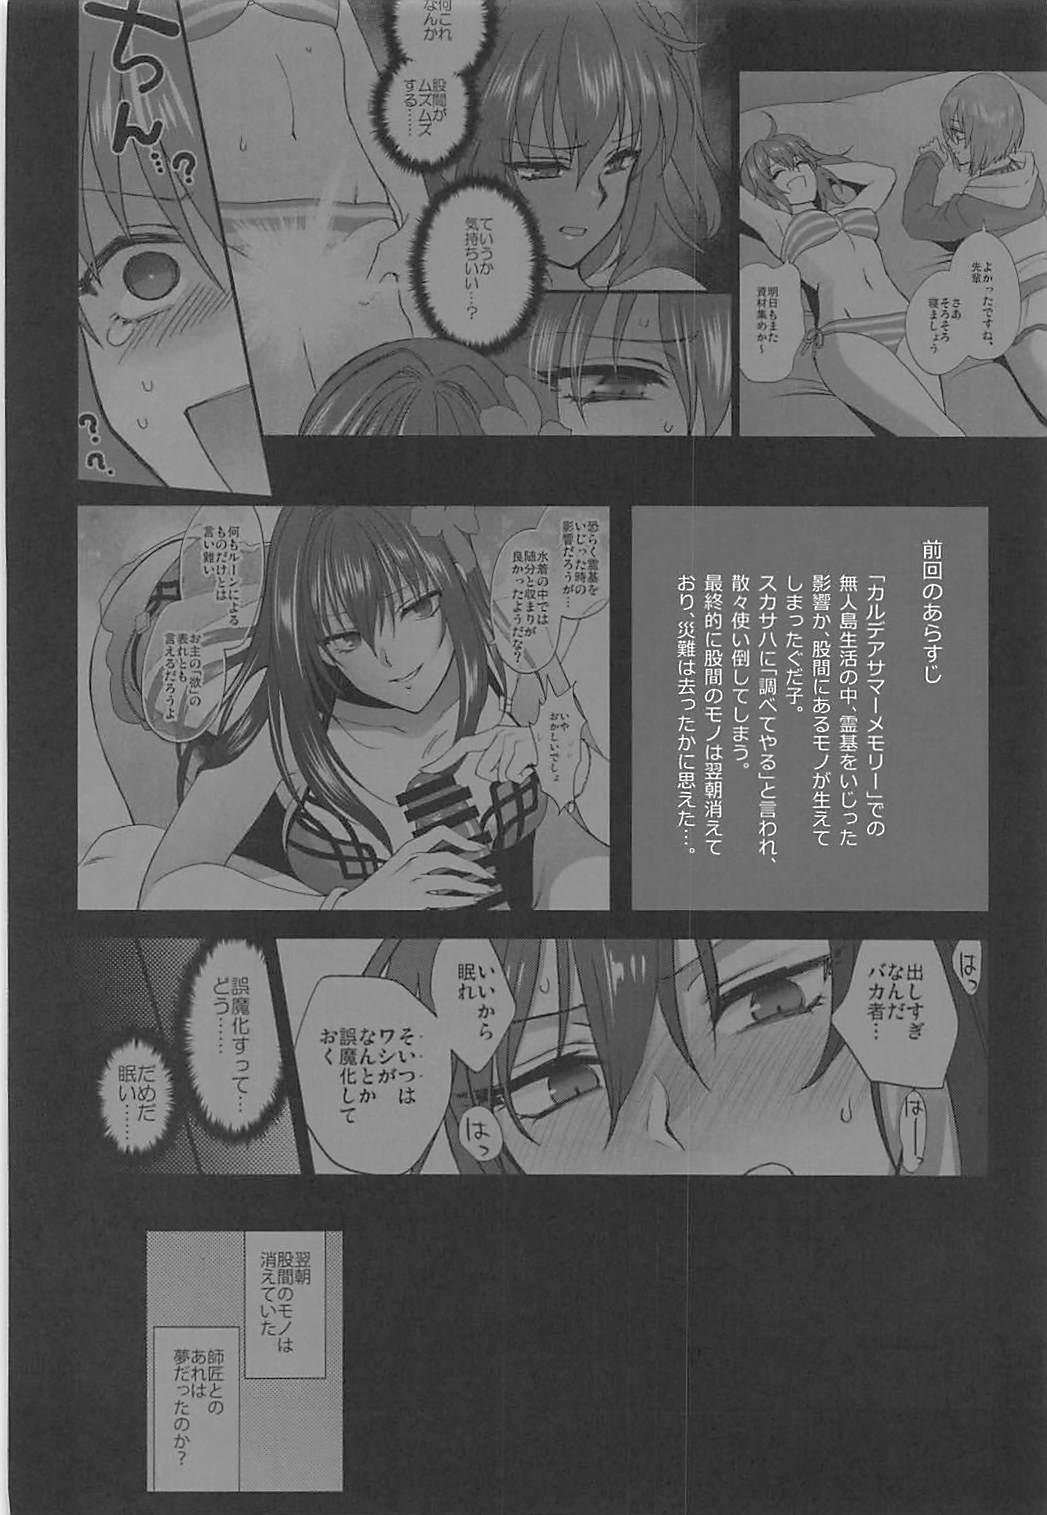 Jerking Off In my room. - Fate grand order Gayemo - Page 3